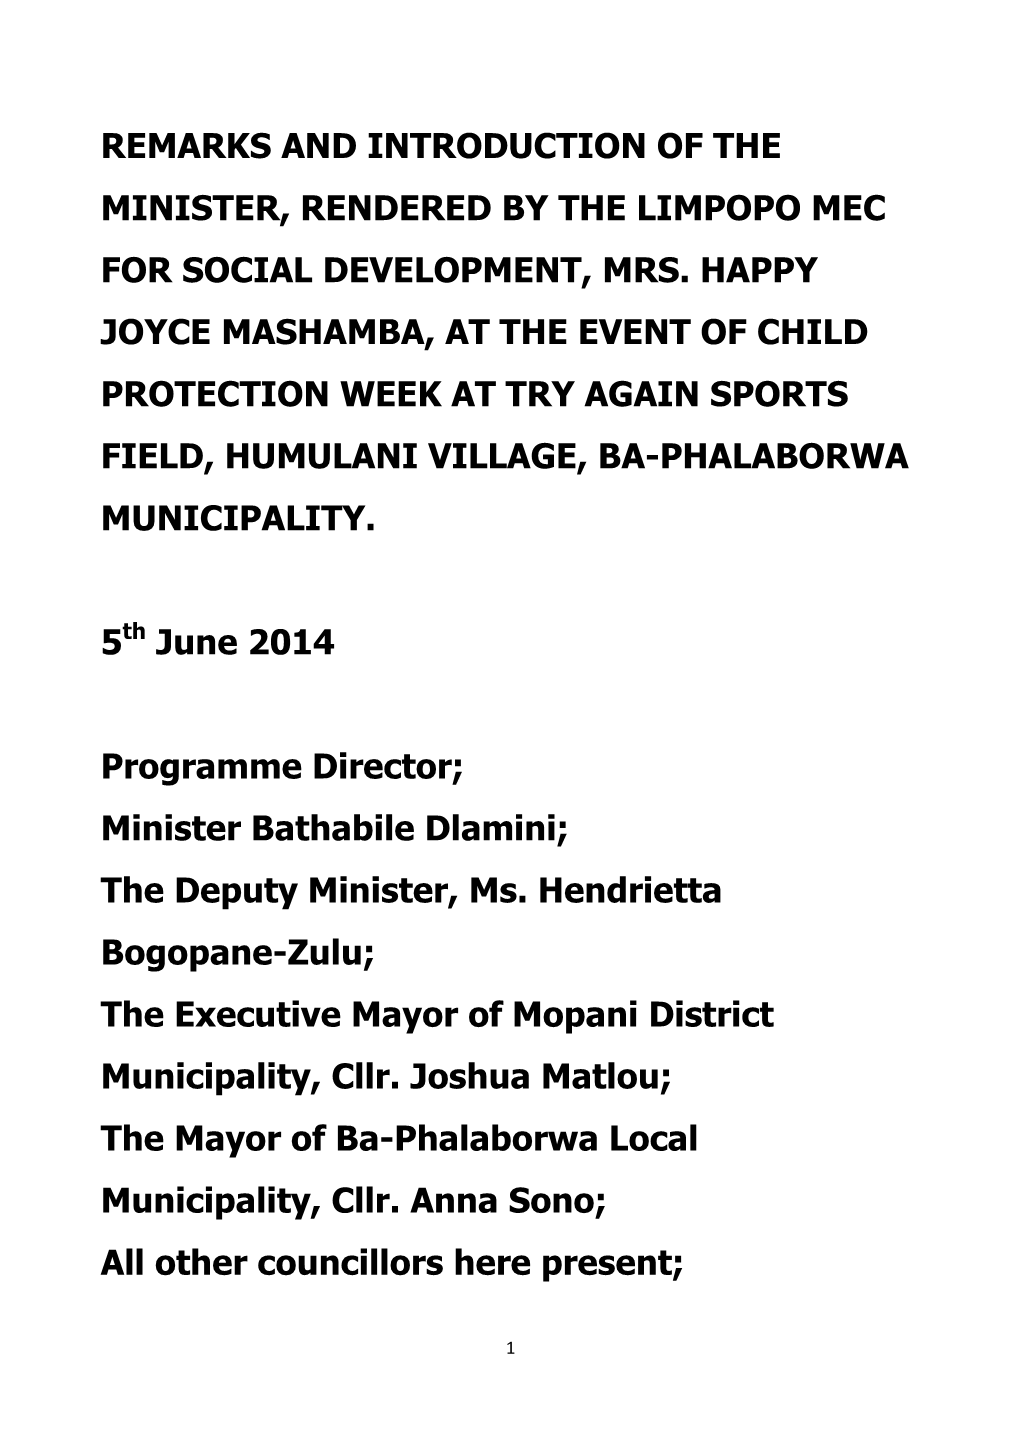 Remarks and Introduction of the Minister, Rendered by the Limpopo Mec for Social Development, Mrs